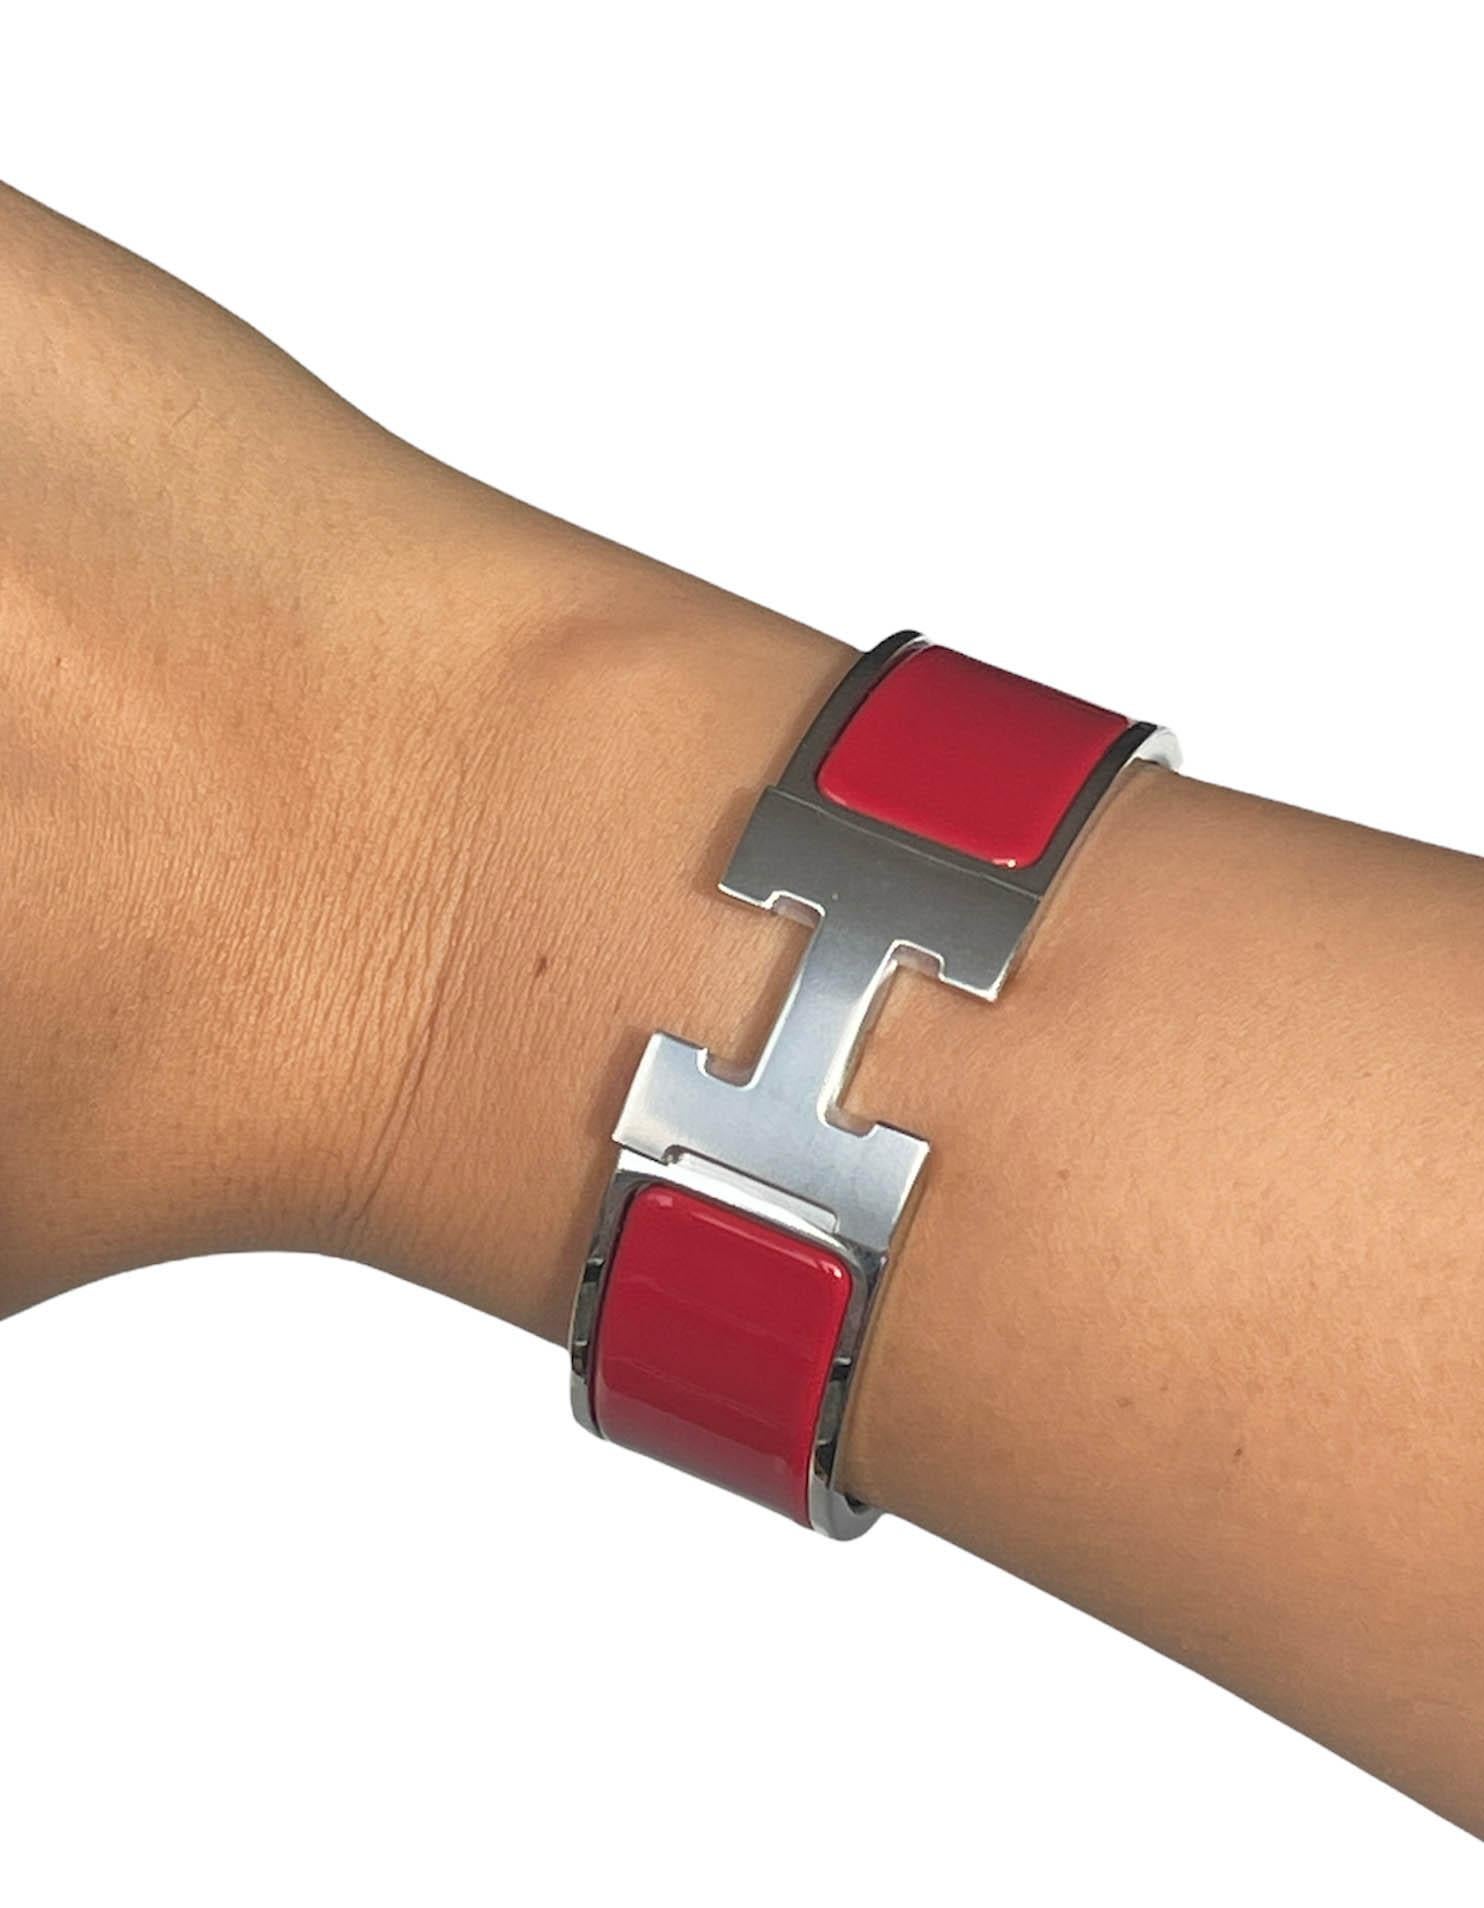 Hermes Palladium/ Rouge H Red Wide H Enamel Clic Clac Bracelet sz PM

Made In: France
Year of Production: 2021
Color: Rouge H red, silver, 
Materials: Palladium plated metal, enamel
Hallmarks: 